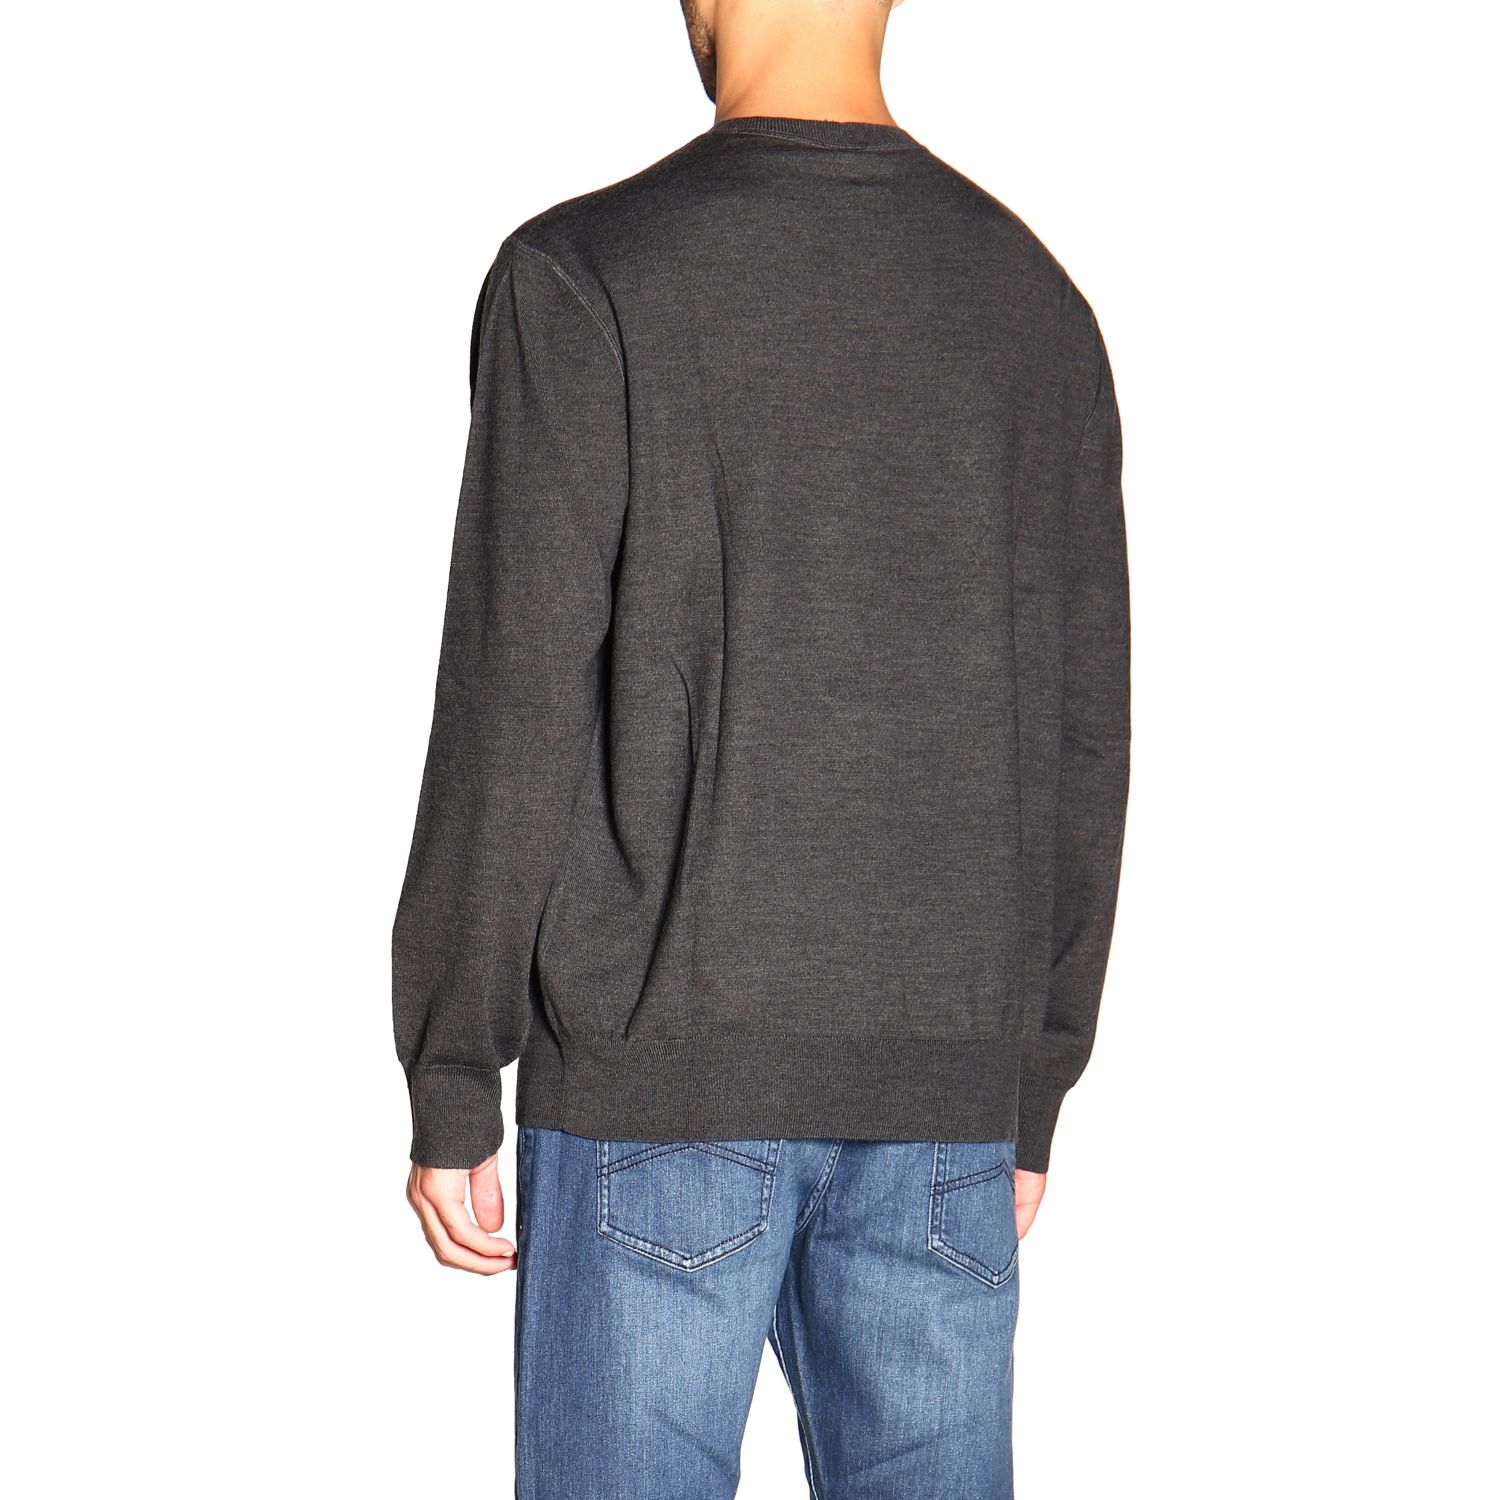 Armani Exchange Outlet: sweater for man - Grey | Armani Exchange sweater  6GZM4F ZMK9Z online on 